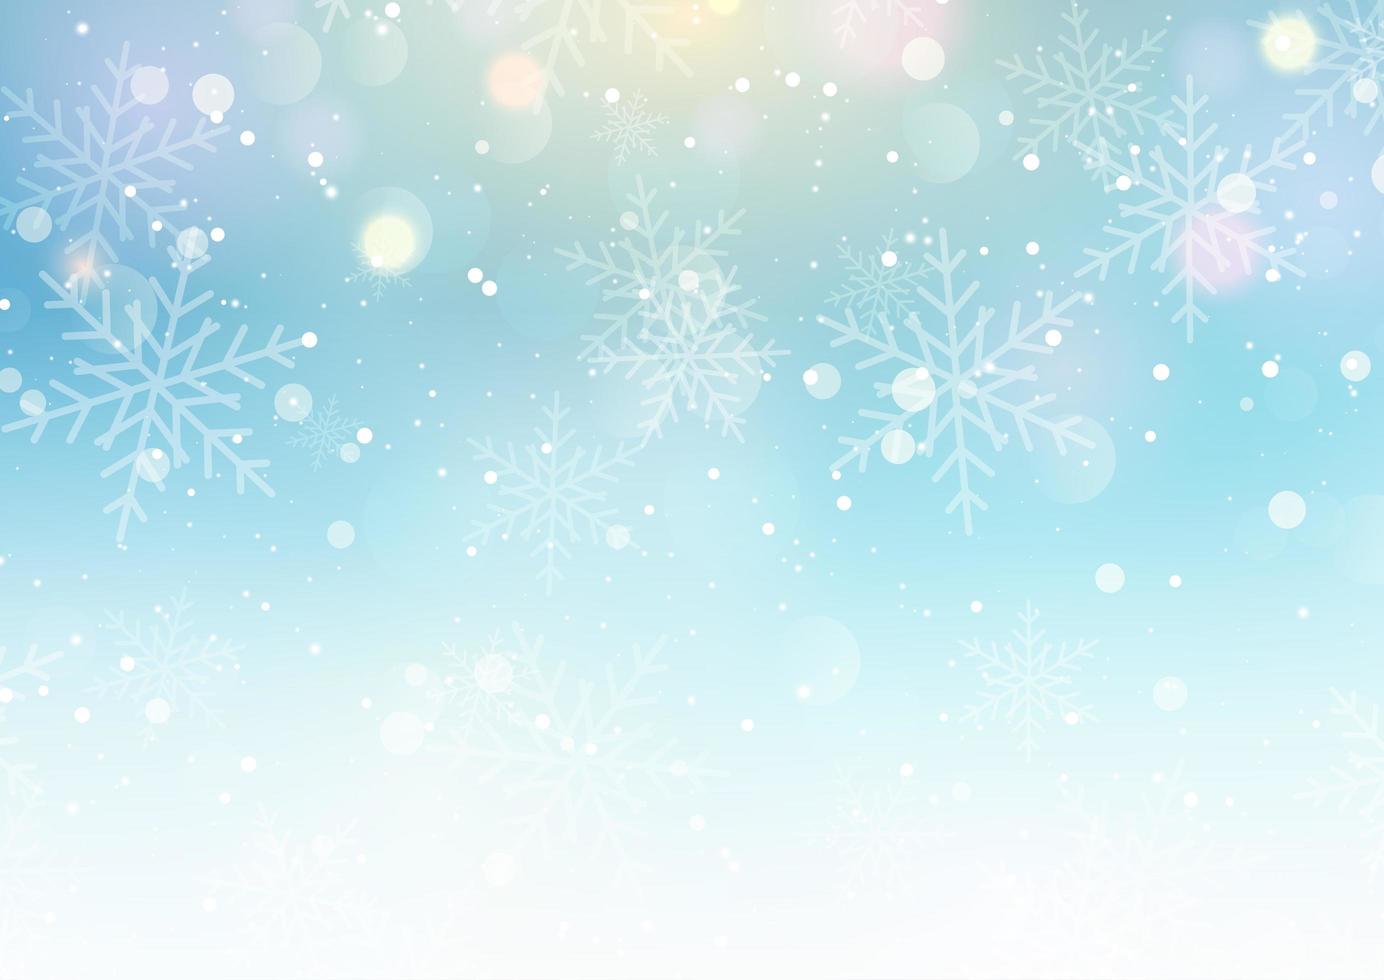 Christmas bokeh background with falling snowflakes vector